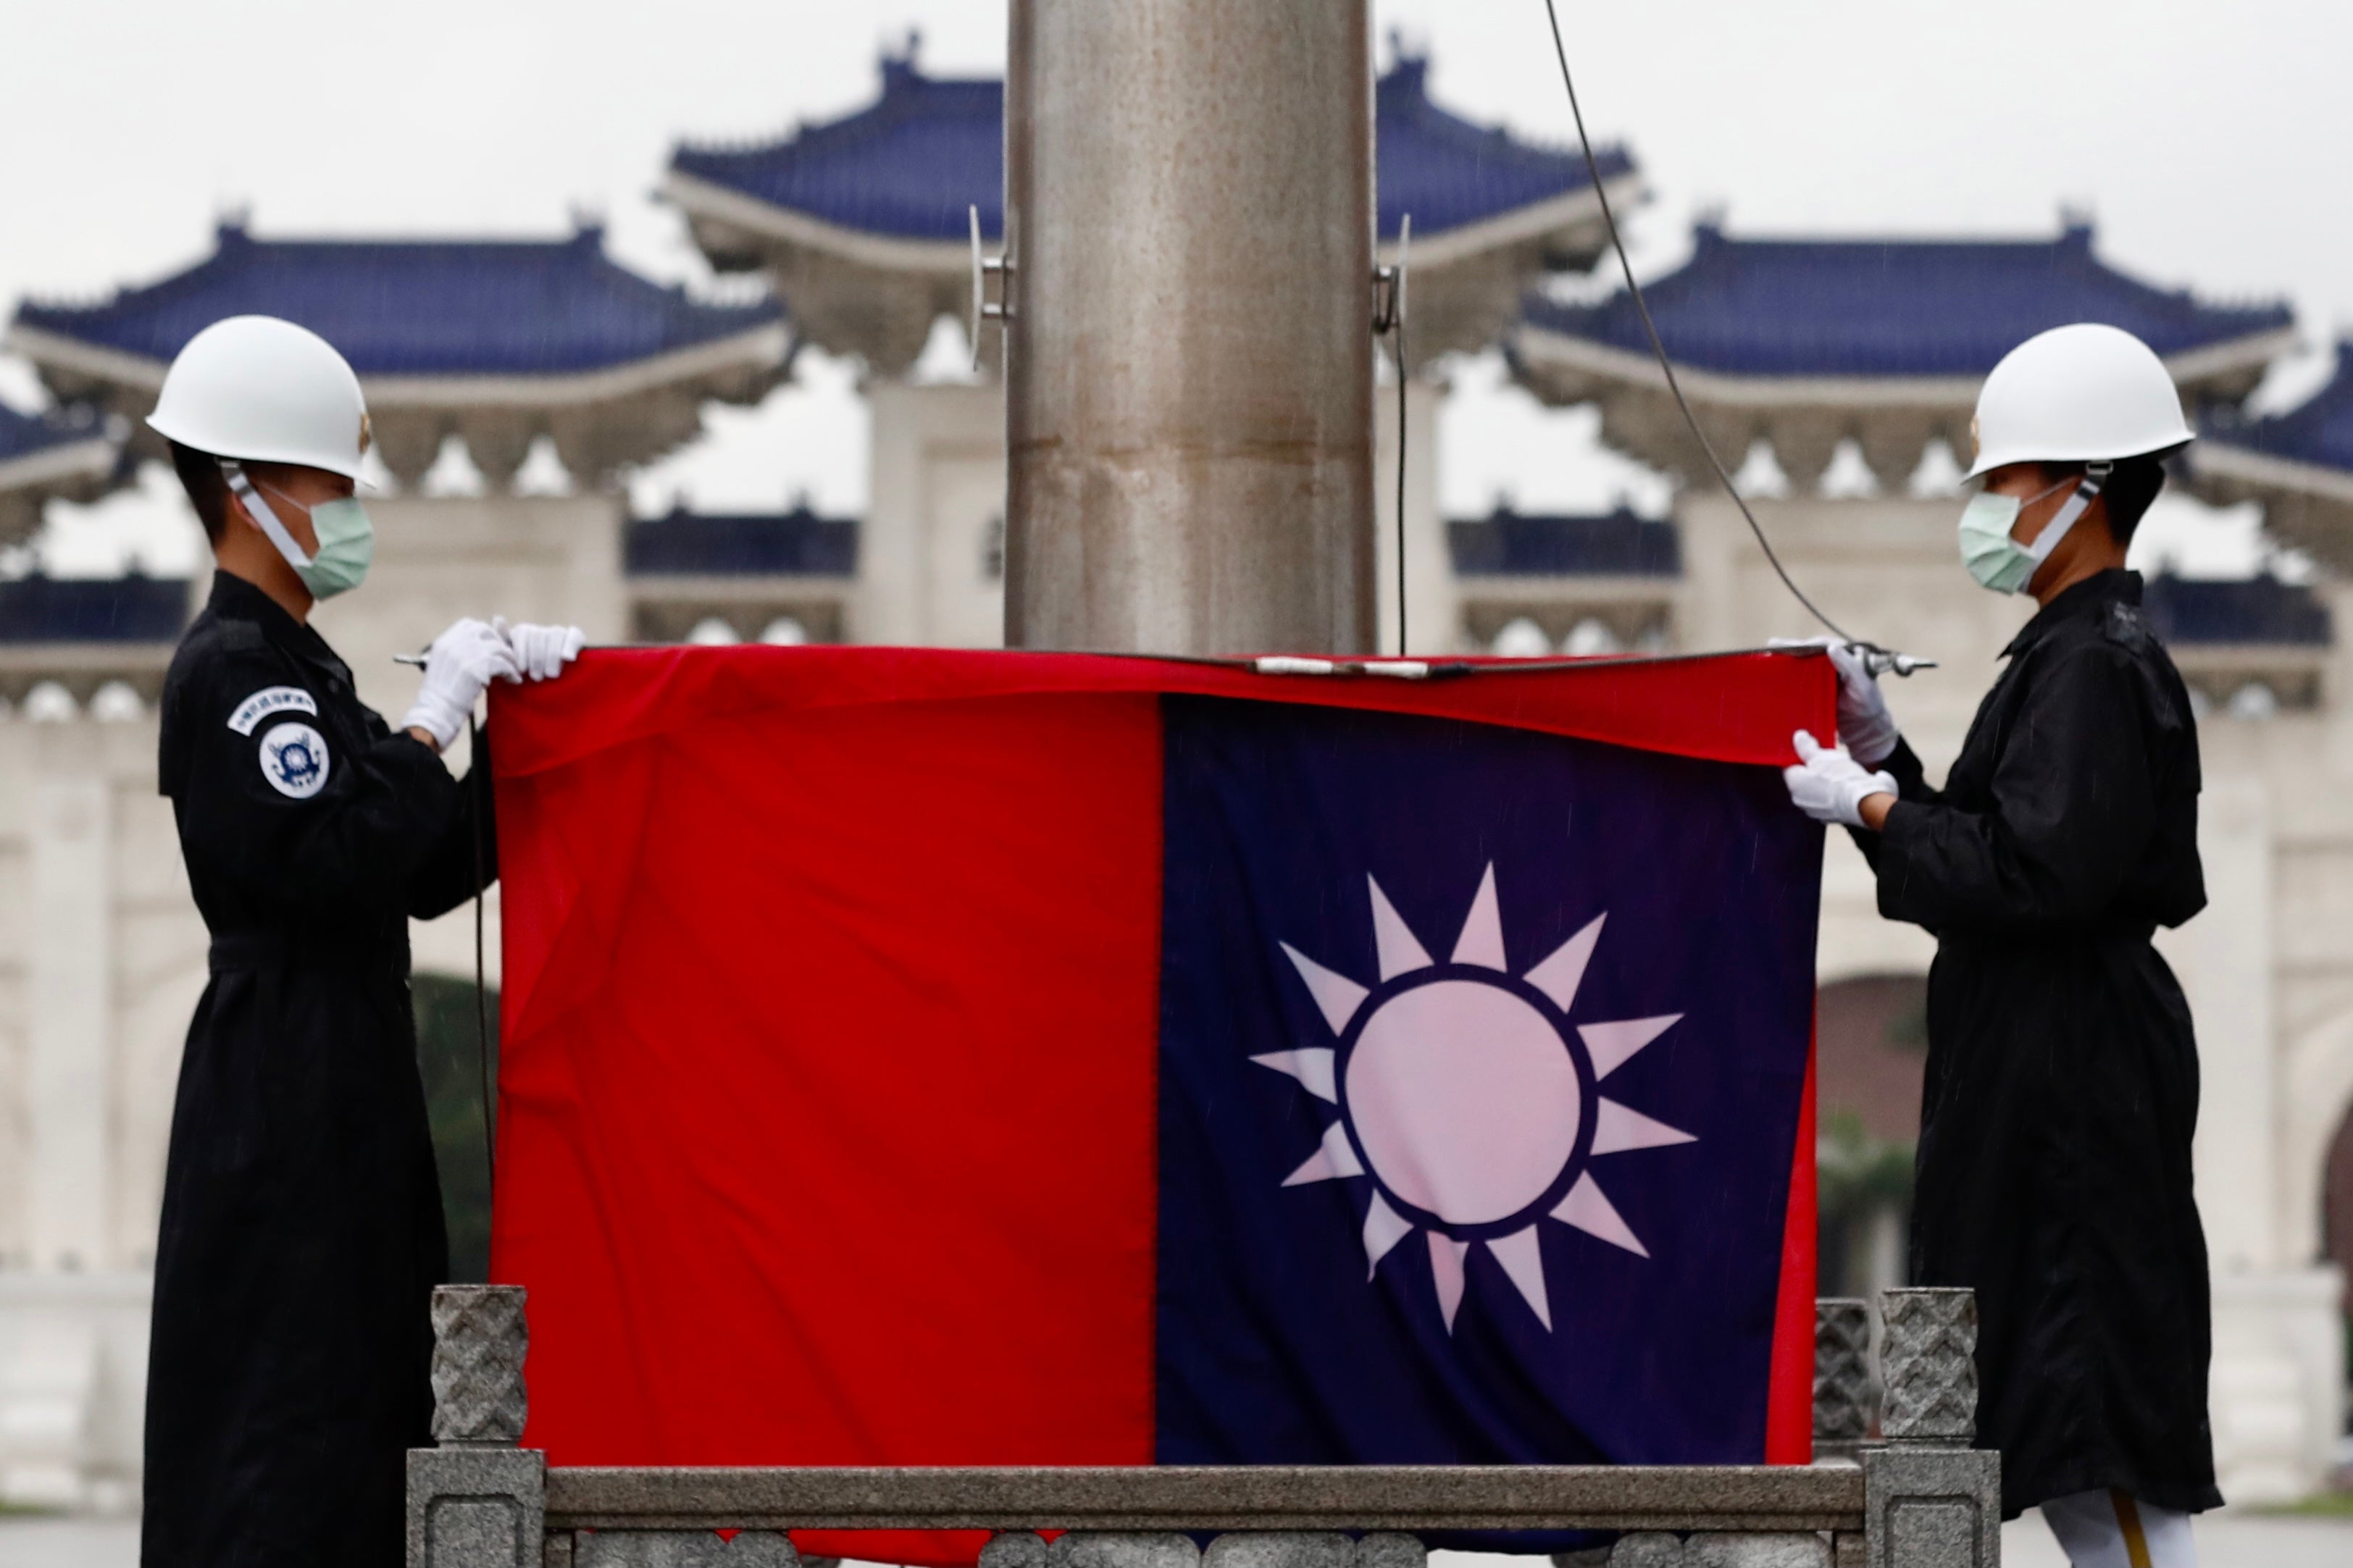 The White House Covid Response Team shared a picture of the Taiwan flag on Twitter this week